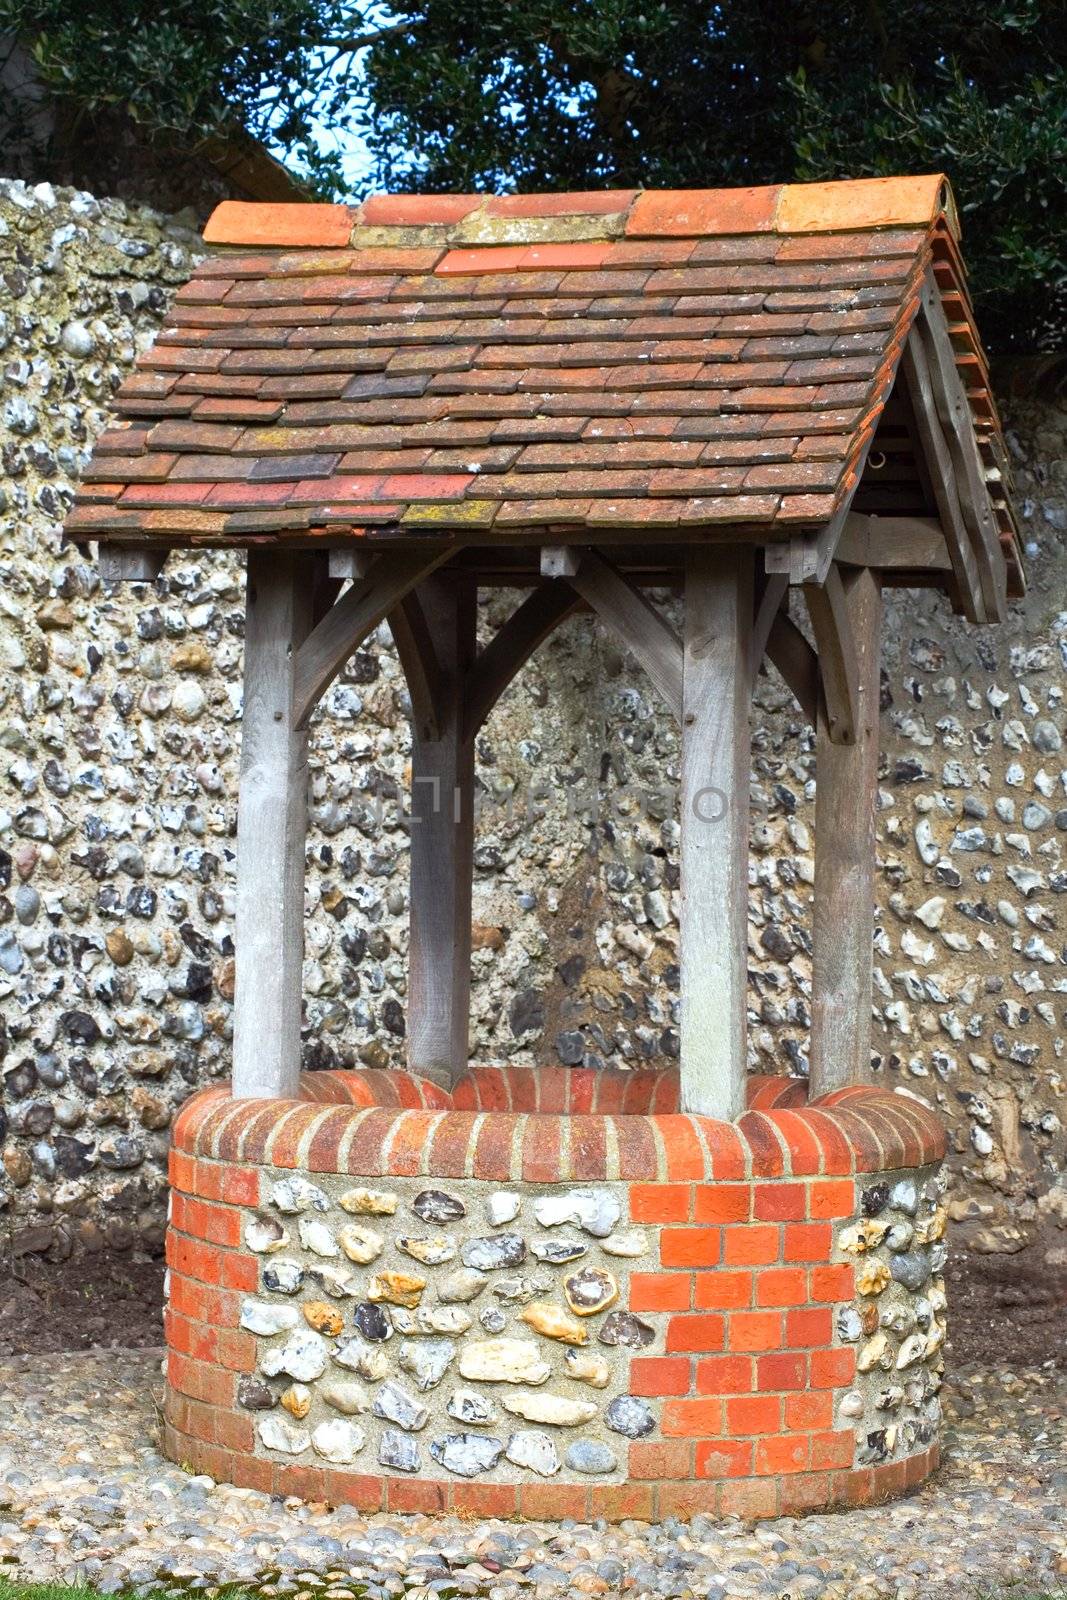 A old wishing well with a brick wall behind it